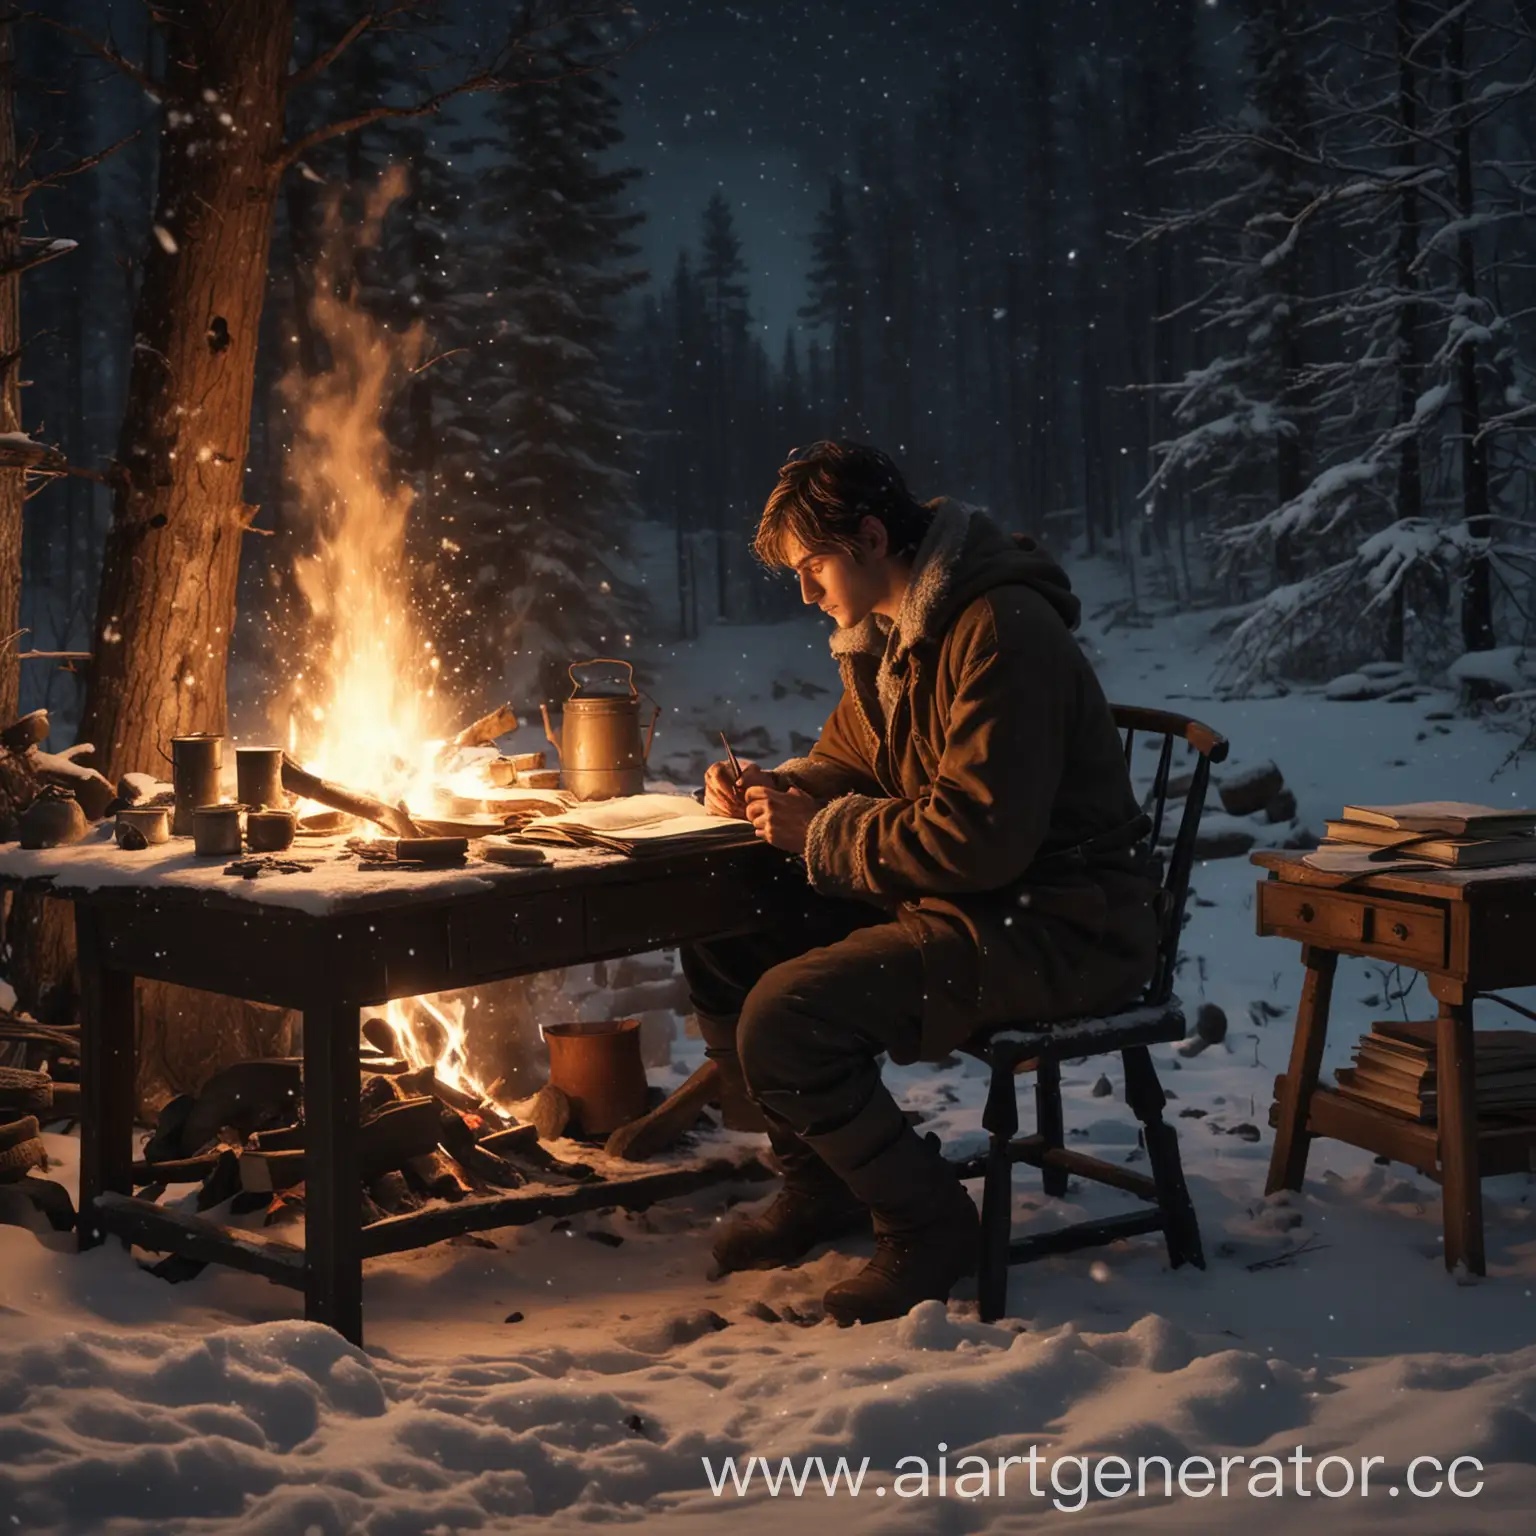 Writer-at-Night-Contemplative-Man-Surrounded-by-Taiga-and-Falling-Snow